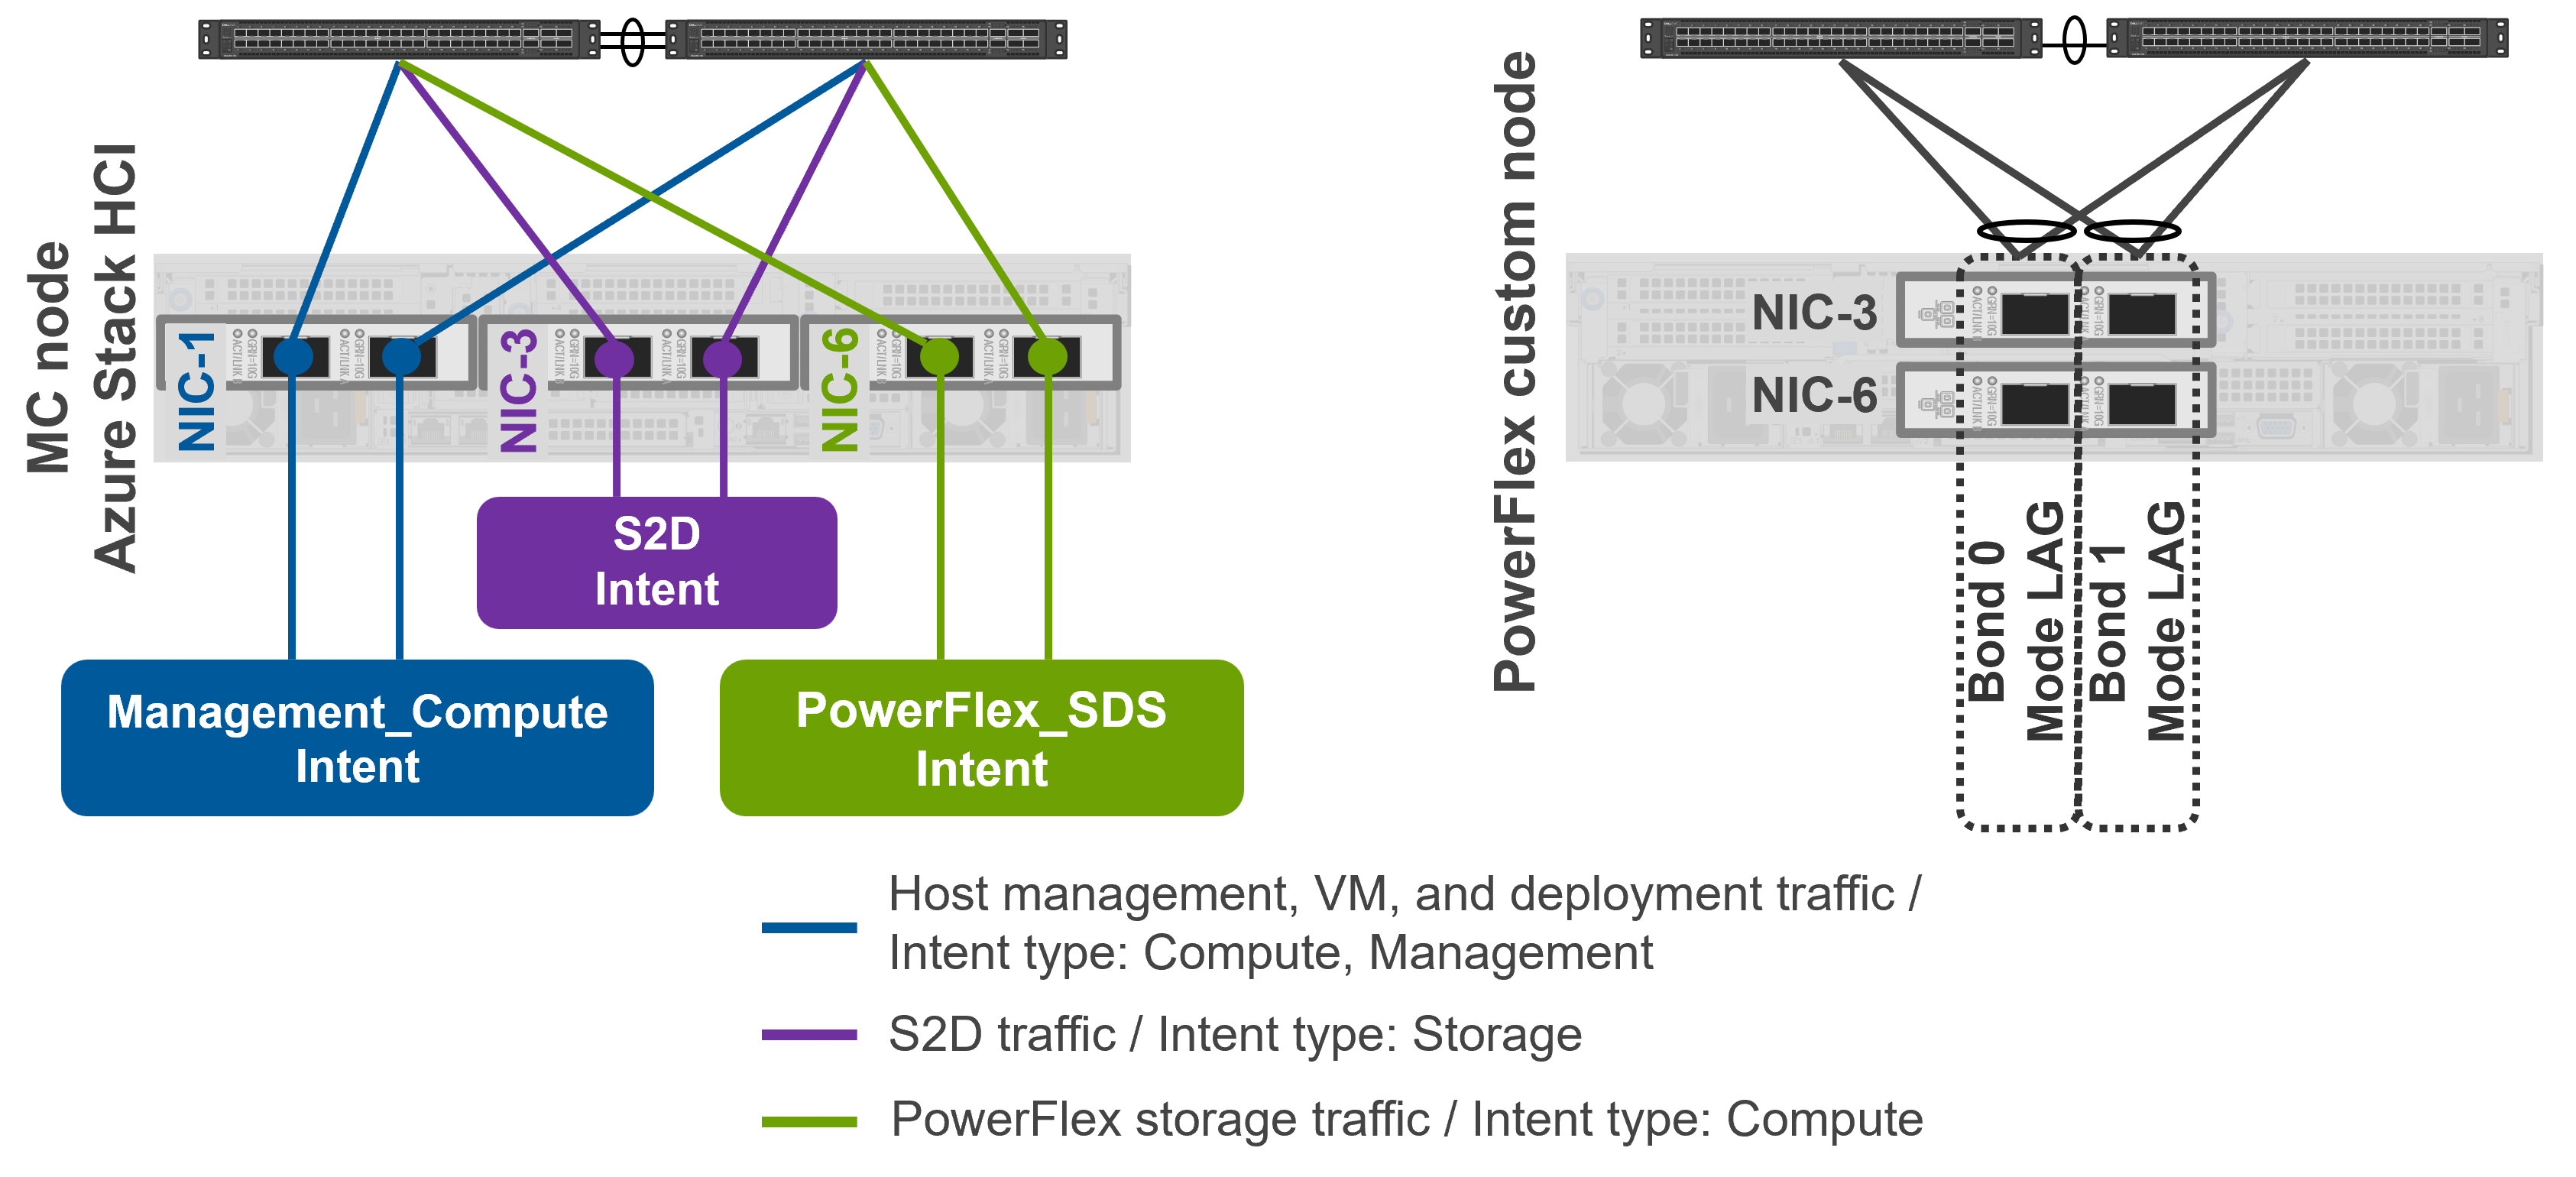 This figure shows the host networking configuration, including the management compute intent and the PowerFlex SDS intent.